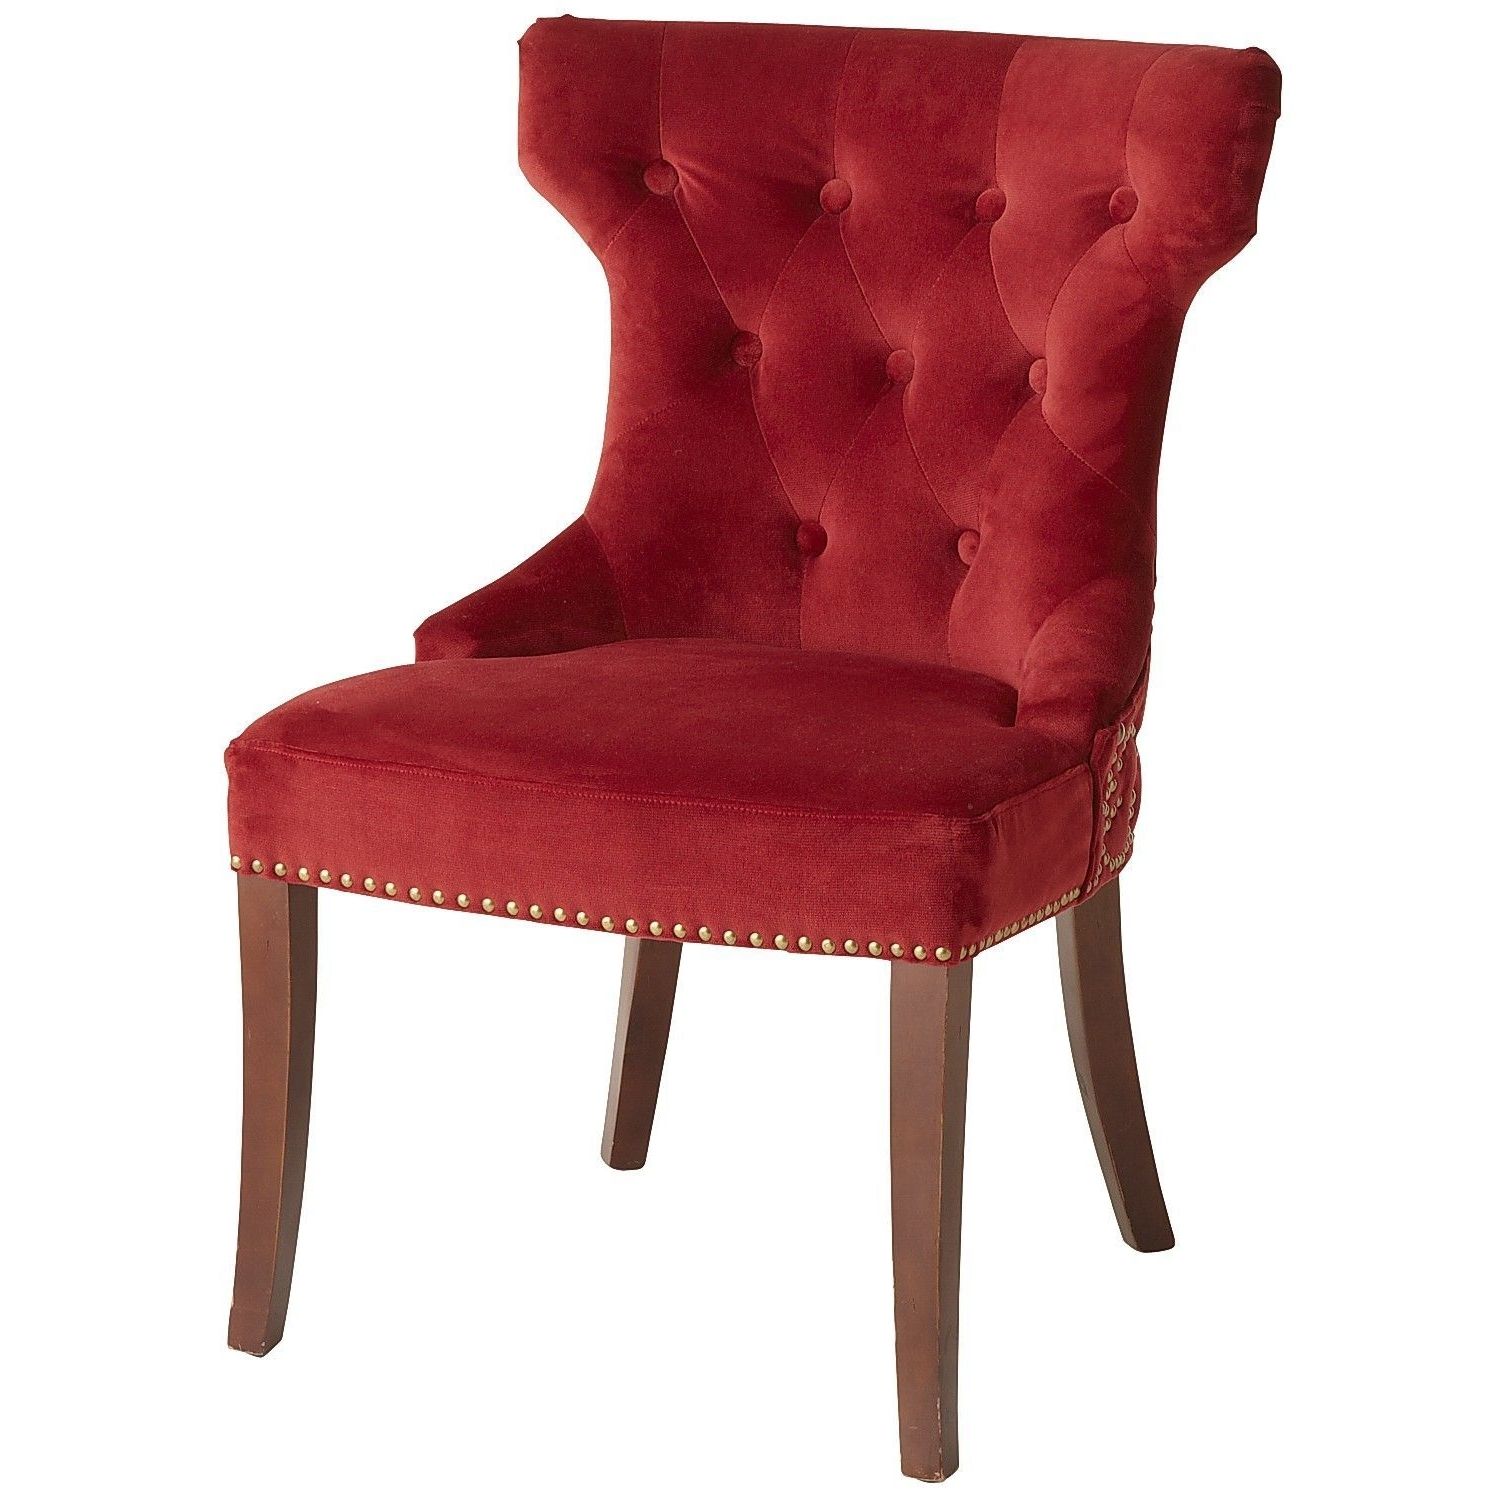 Red Dining Chairs For Most Recent Hourglass Velvet Red Dining Chair With Espresso Wood (View 18 of 25)